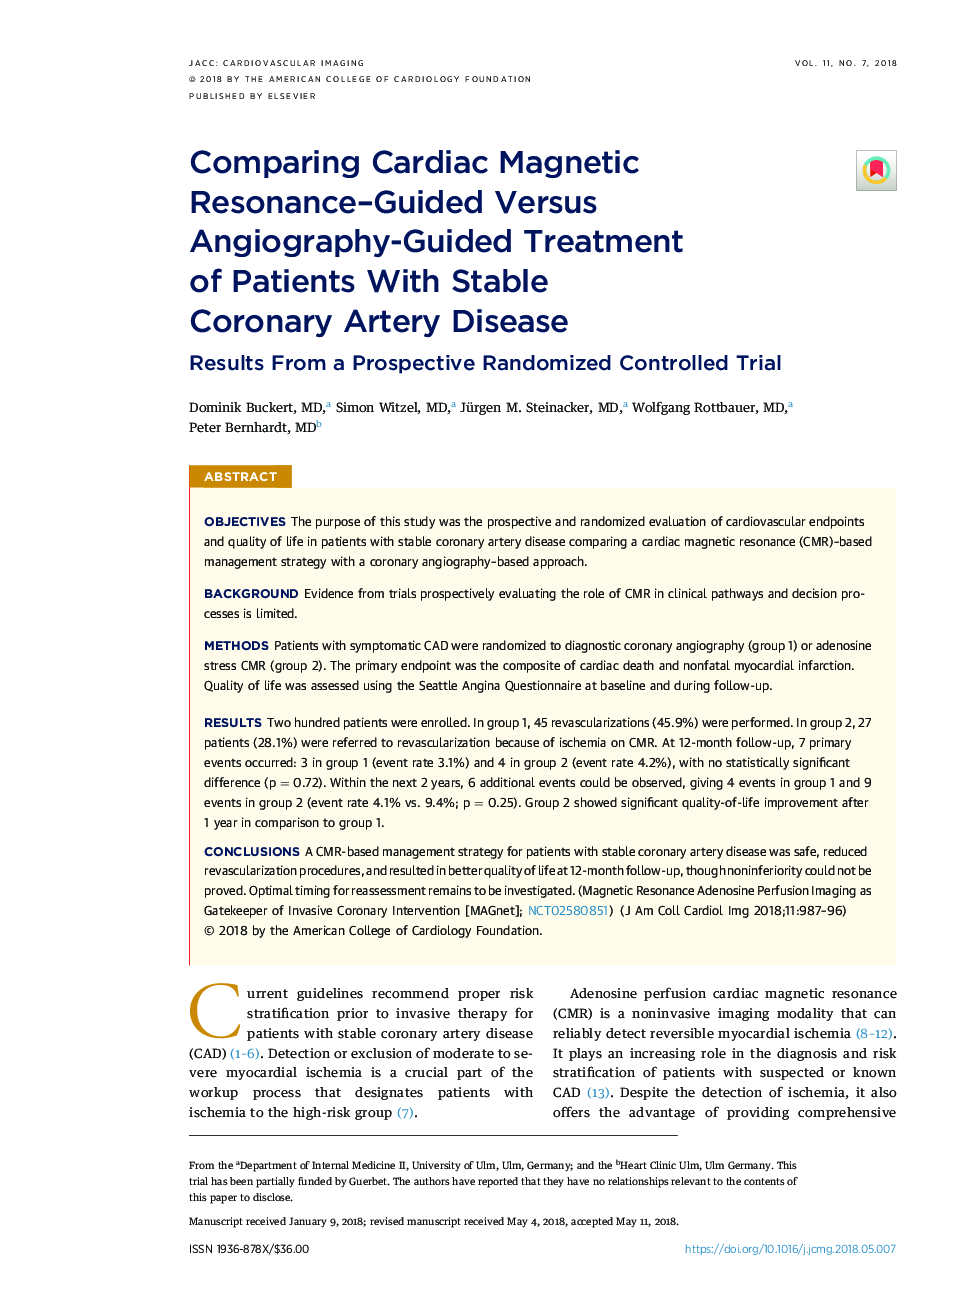 Comparing Cardiac Magnetic Resonance-Guided Versus Angiography-Guided Treatment ofÂ Patients With Stable CoronaryÂ ArteryÂ Disease